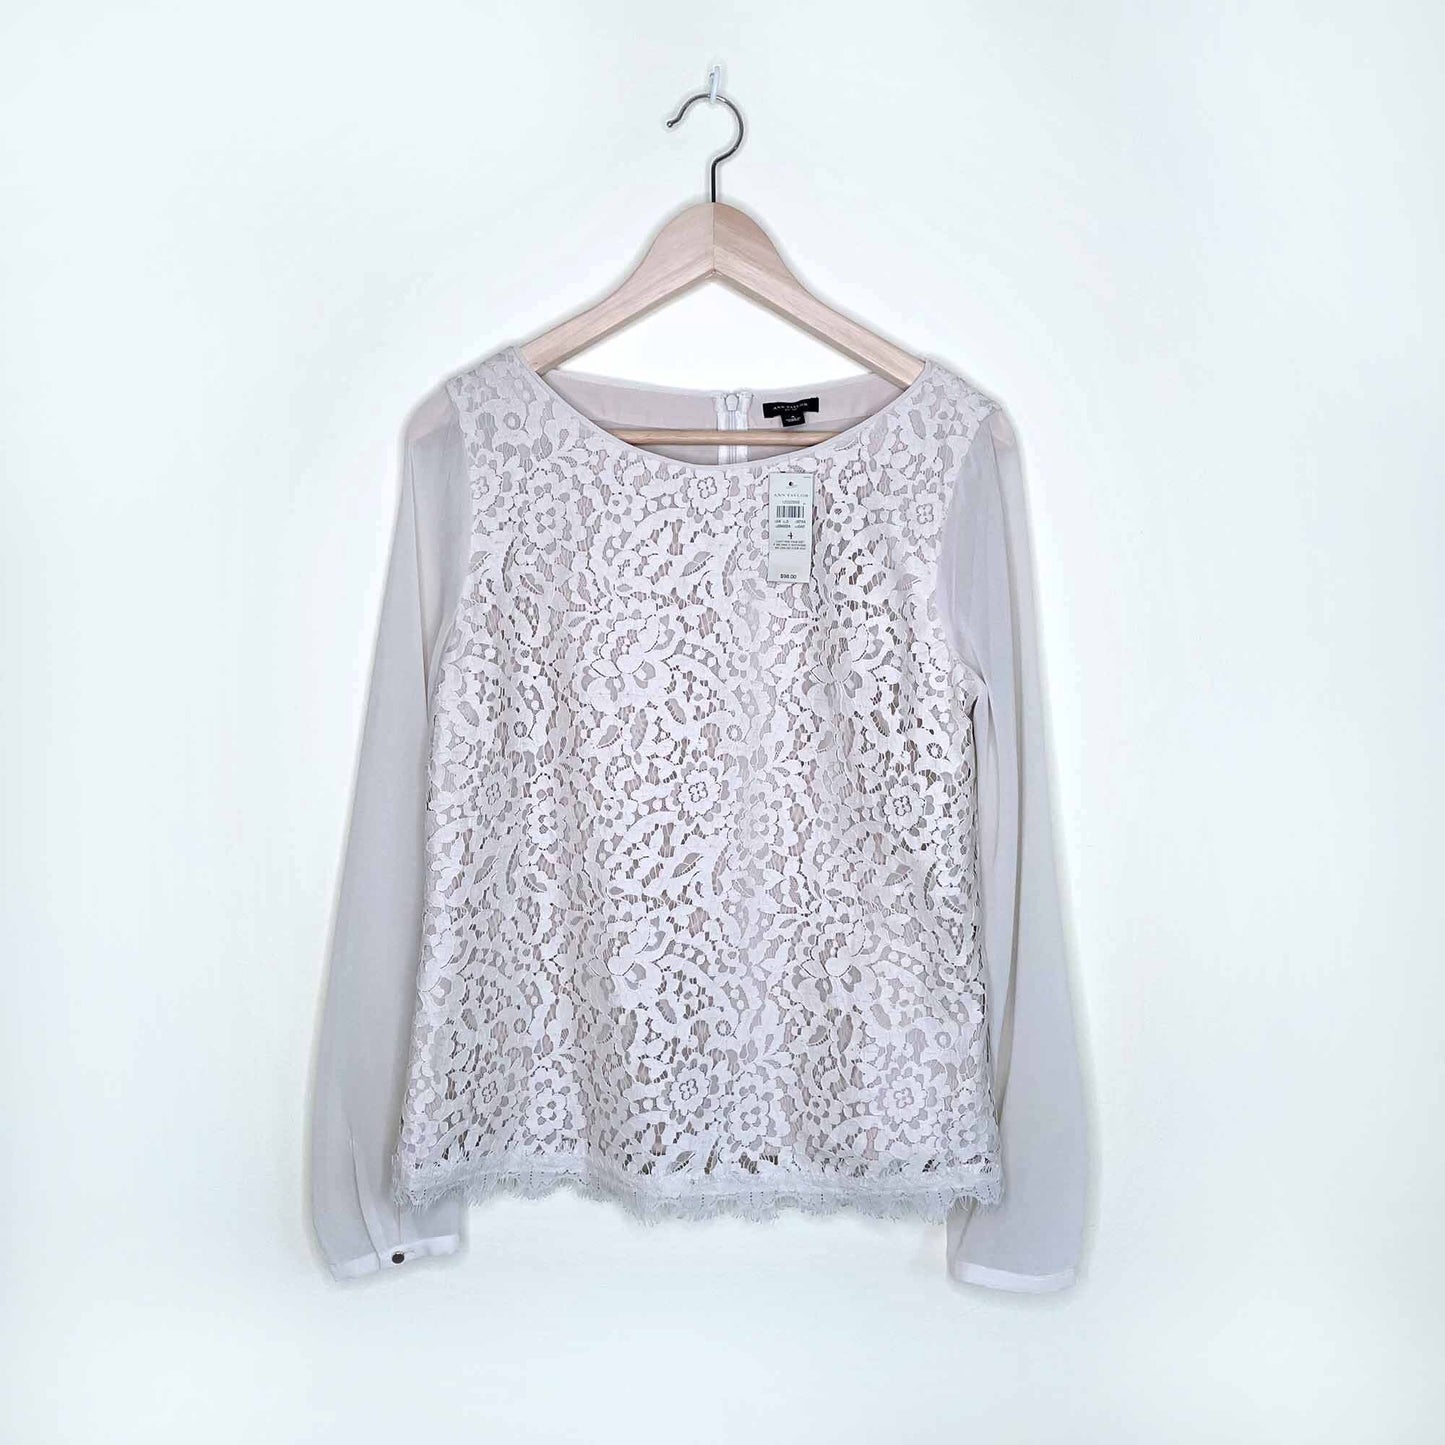 nwt ann taylor lace blouse with sheer sleeves - size 4